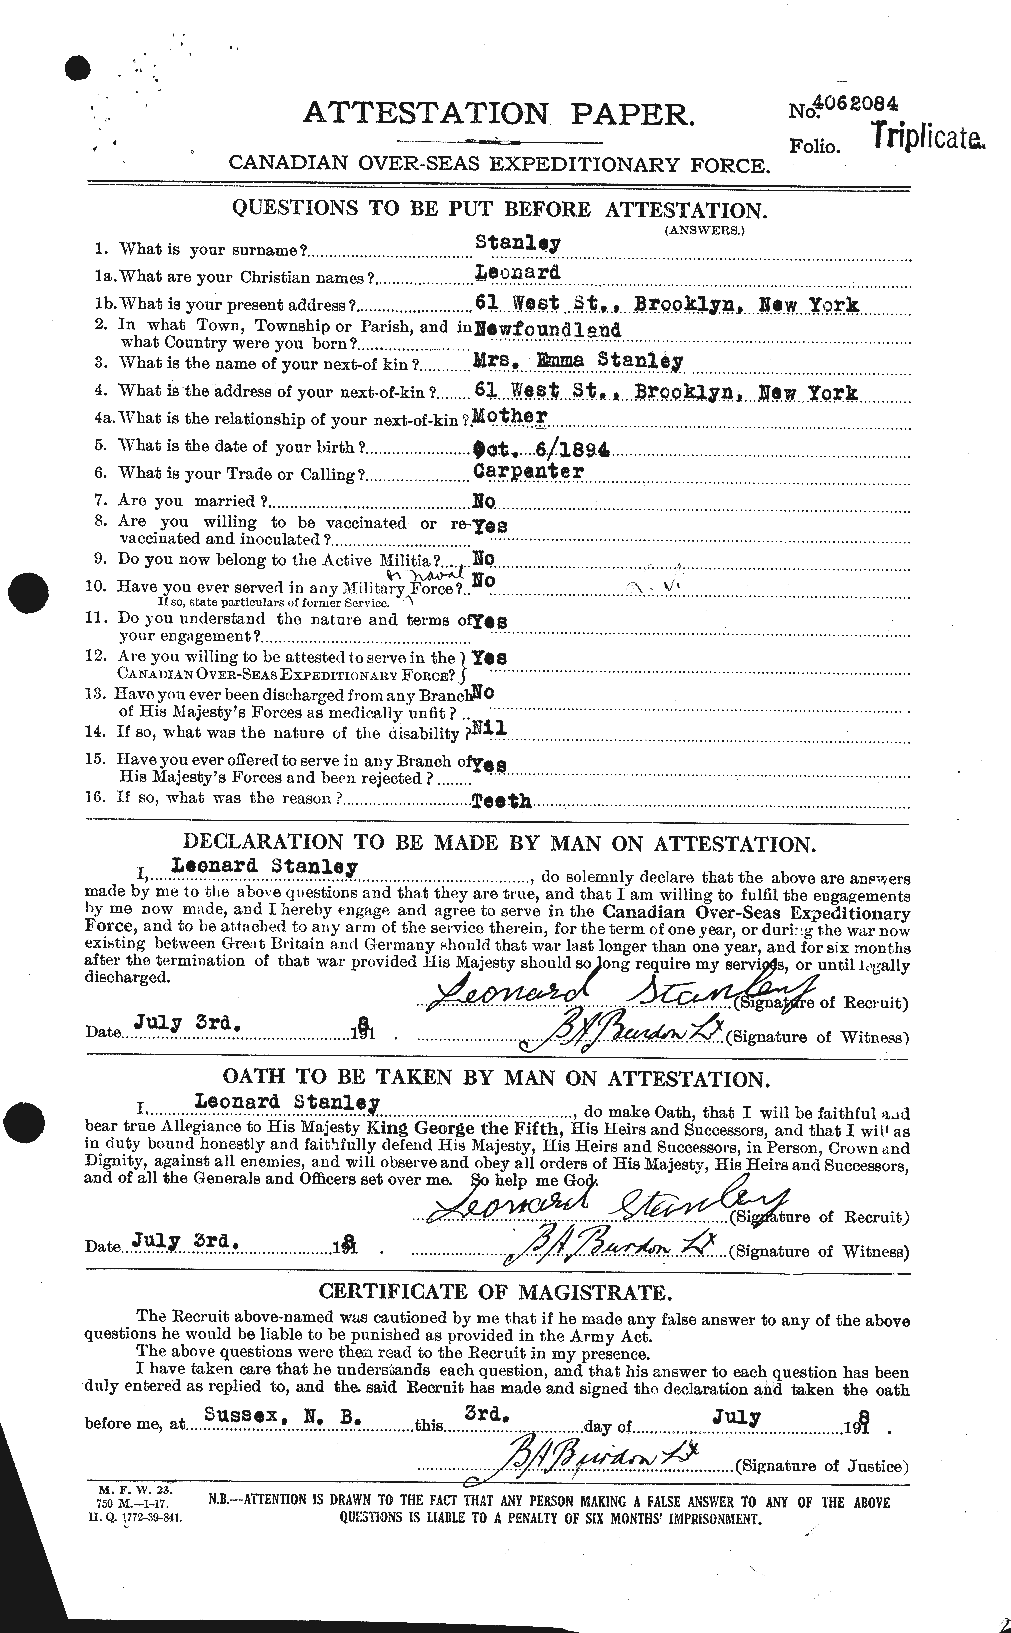 Personnel Records of the First World War - CEF 114940a